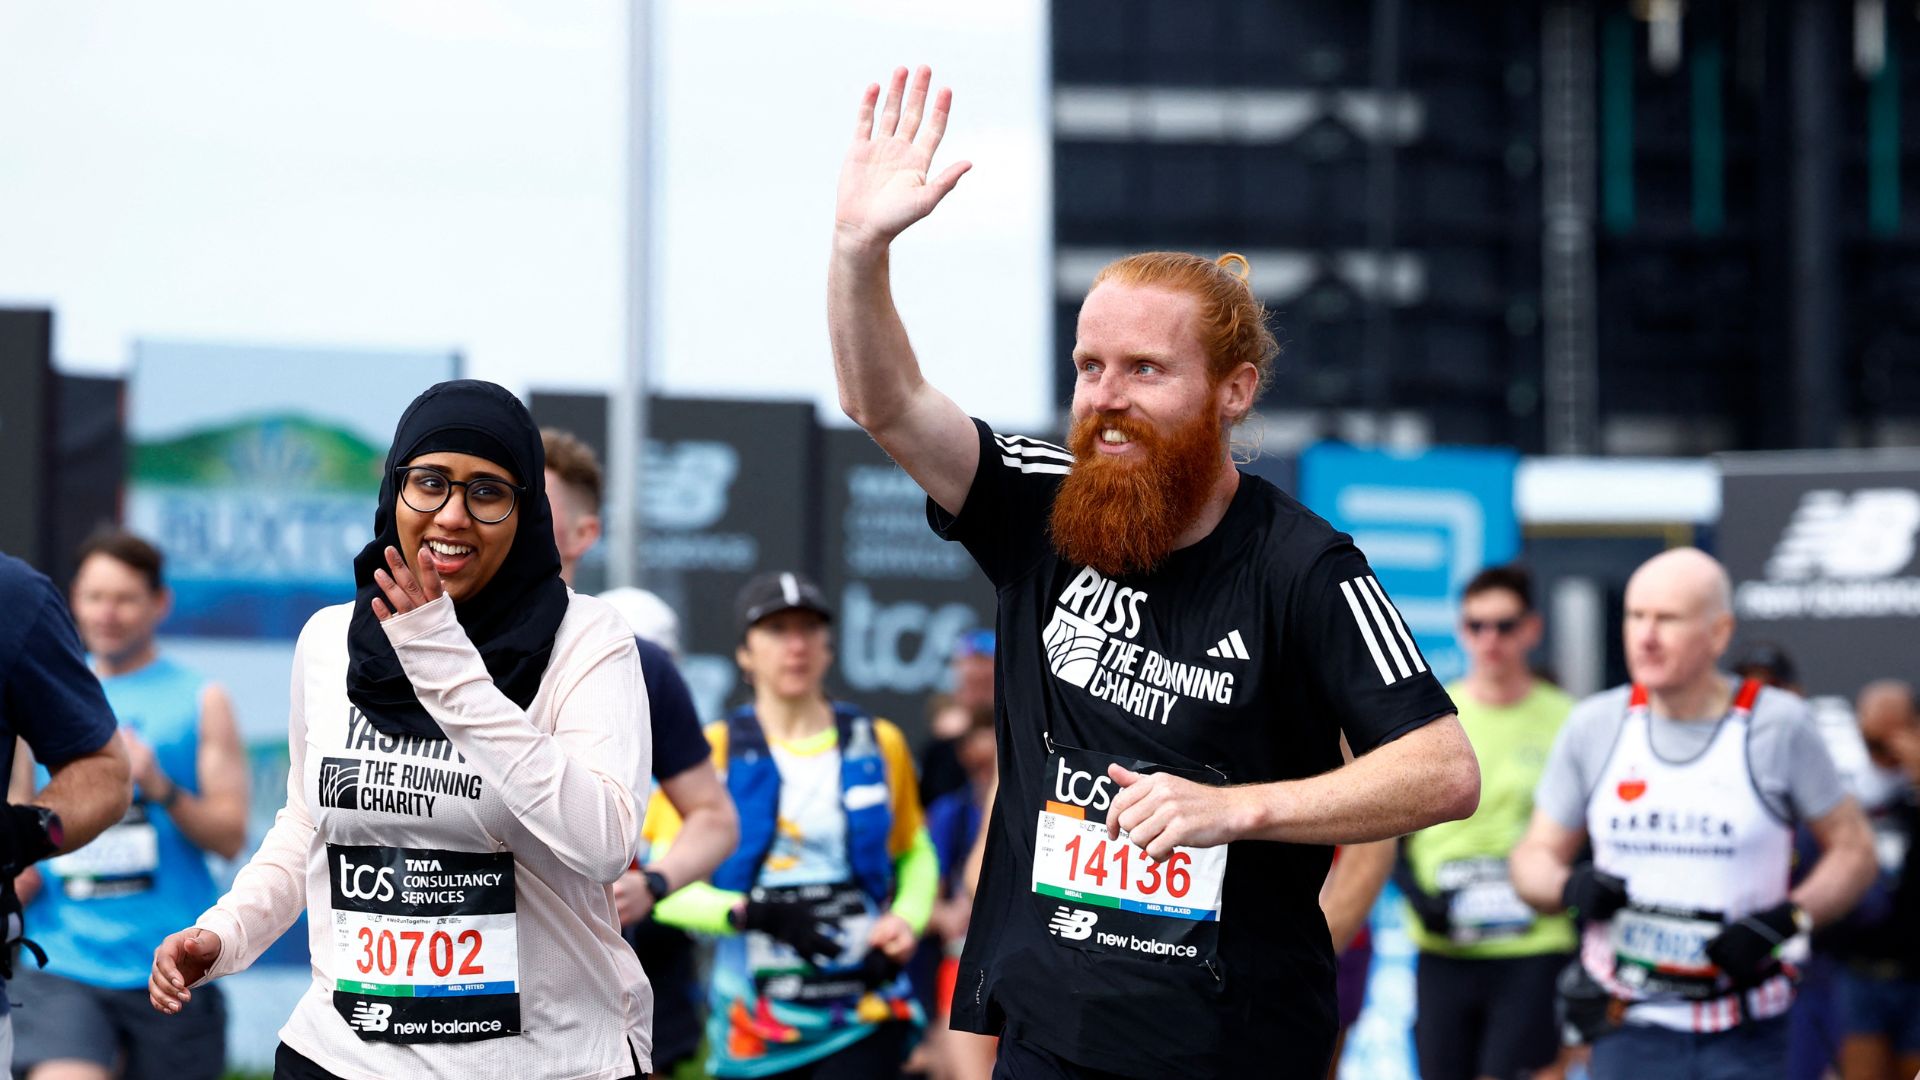 The UK's Russ Cook and Yasmin Mahamud in action during Sunday's London Marathon. /John Sibley/Reuters